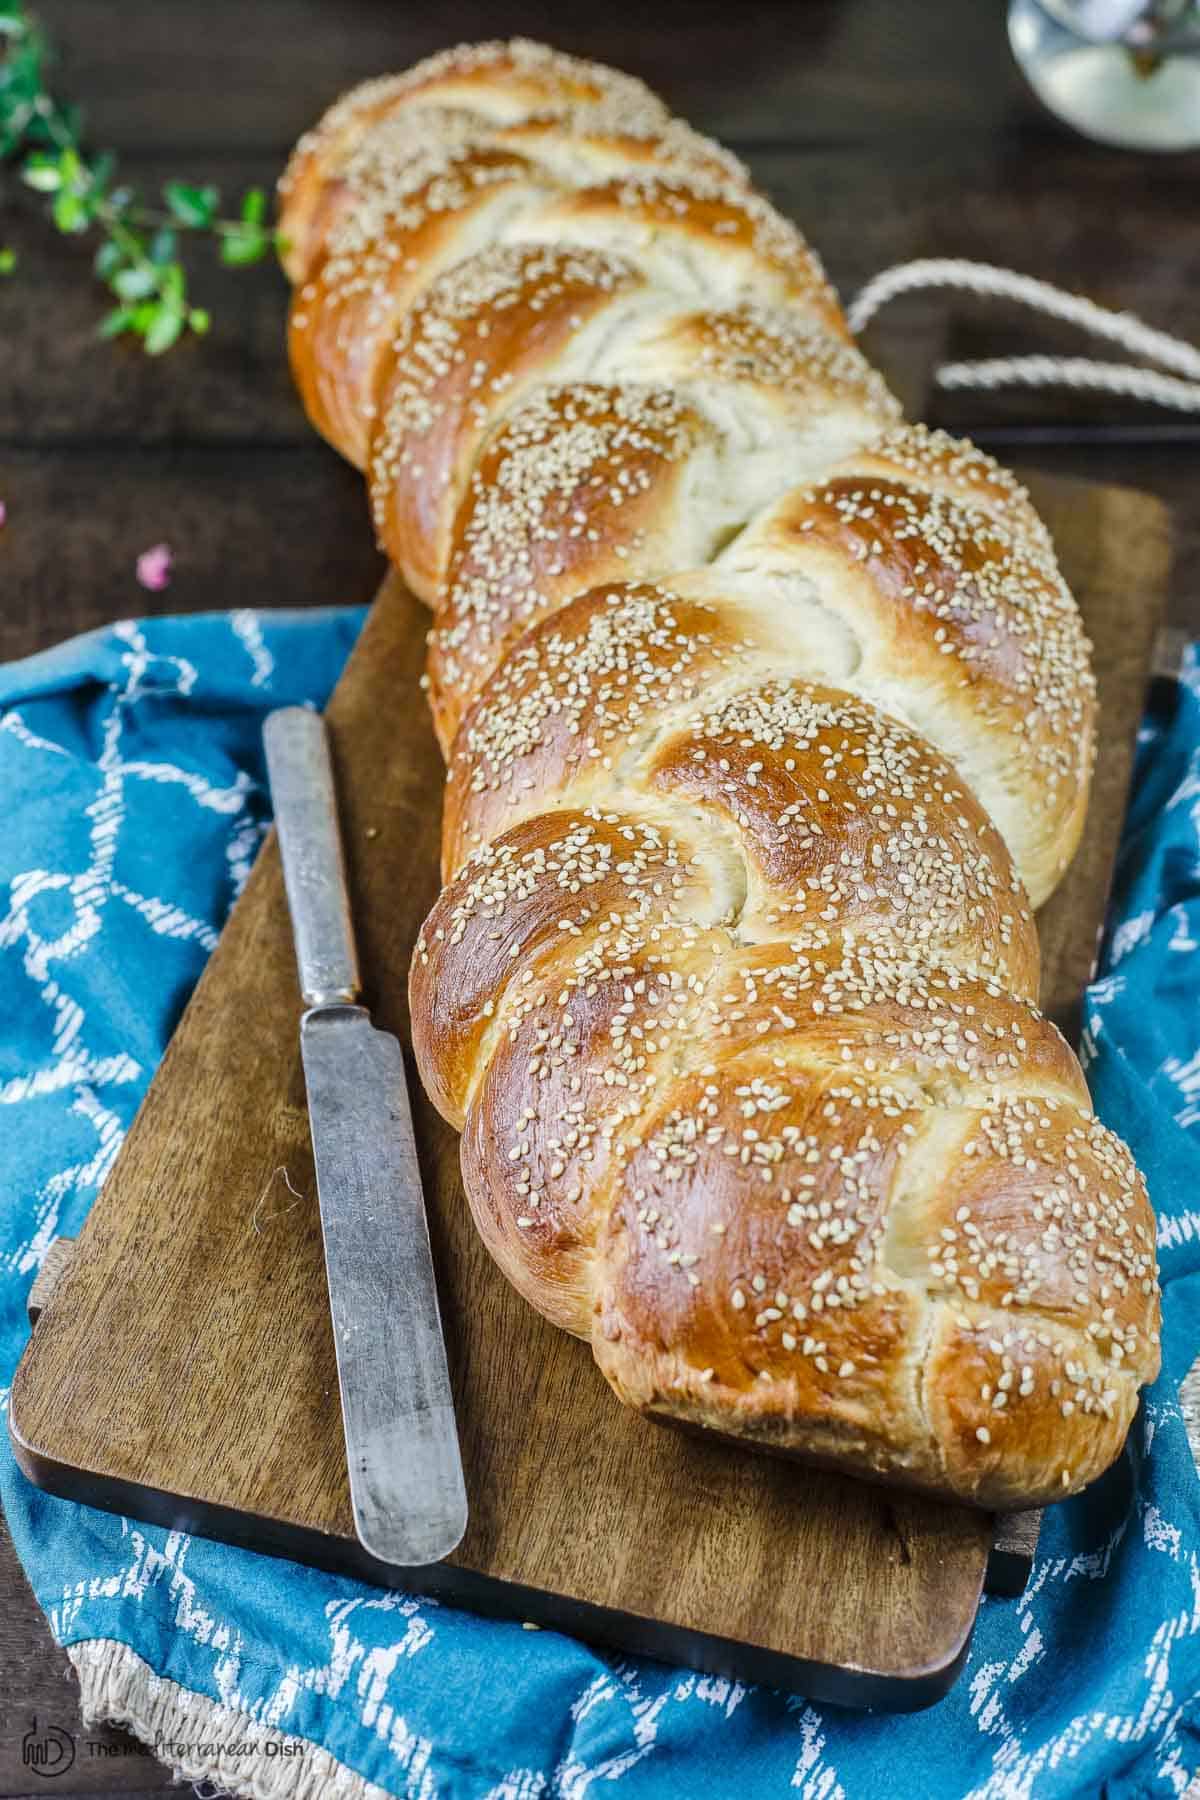 How to Make Challah Bread